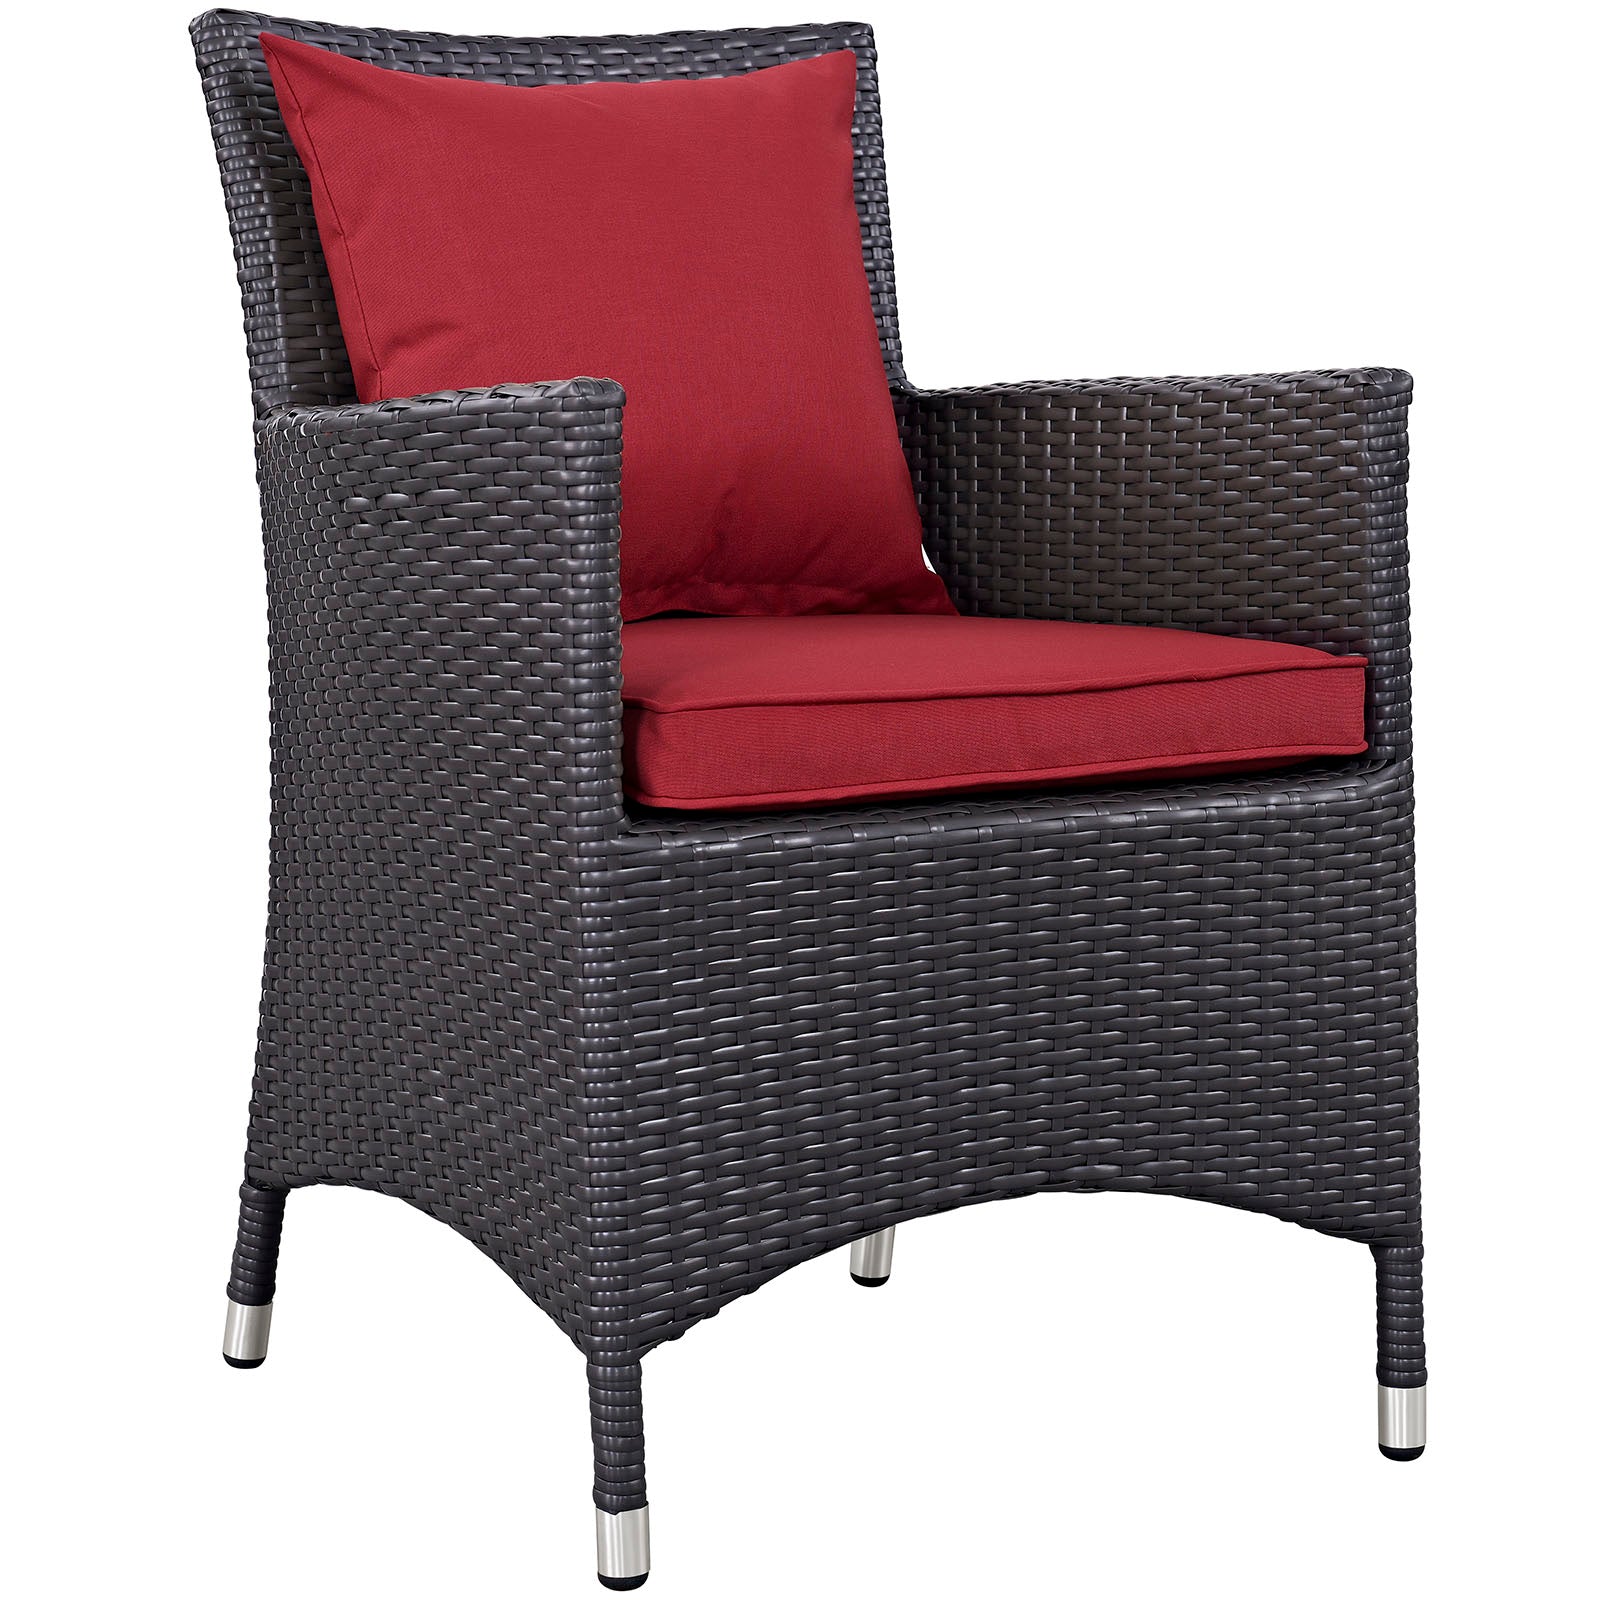 Modway Outdoor Dining Sets - Convene 7 Piece Outdoor Patio Dining Set Espresso Red